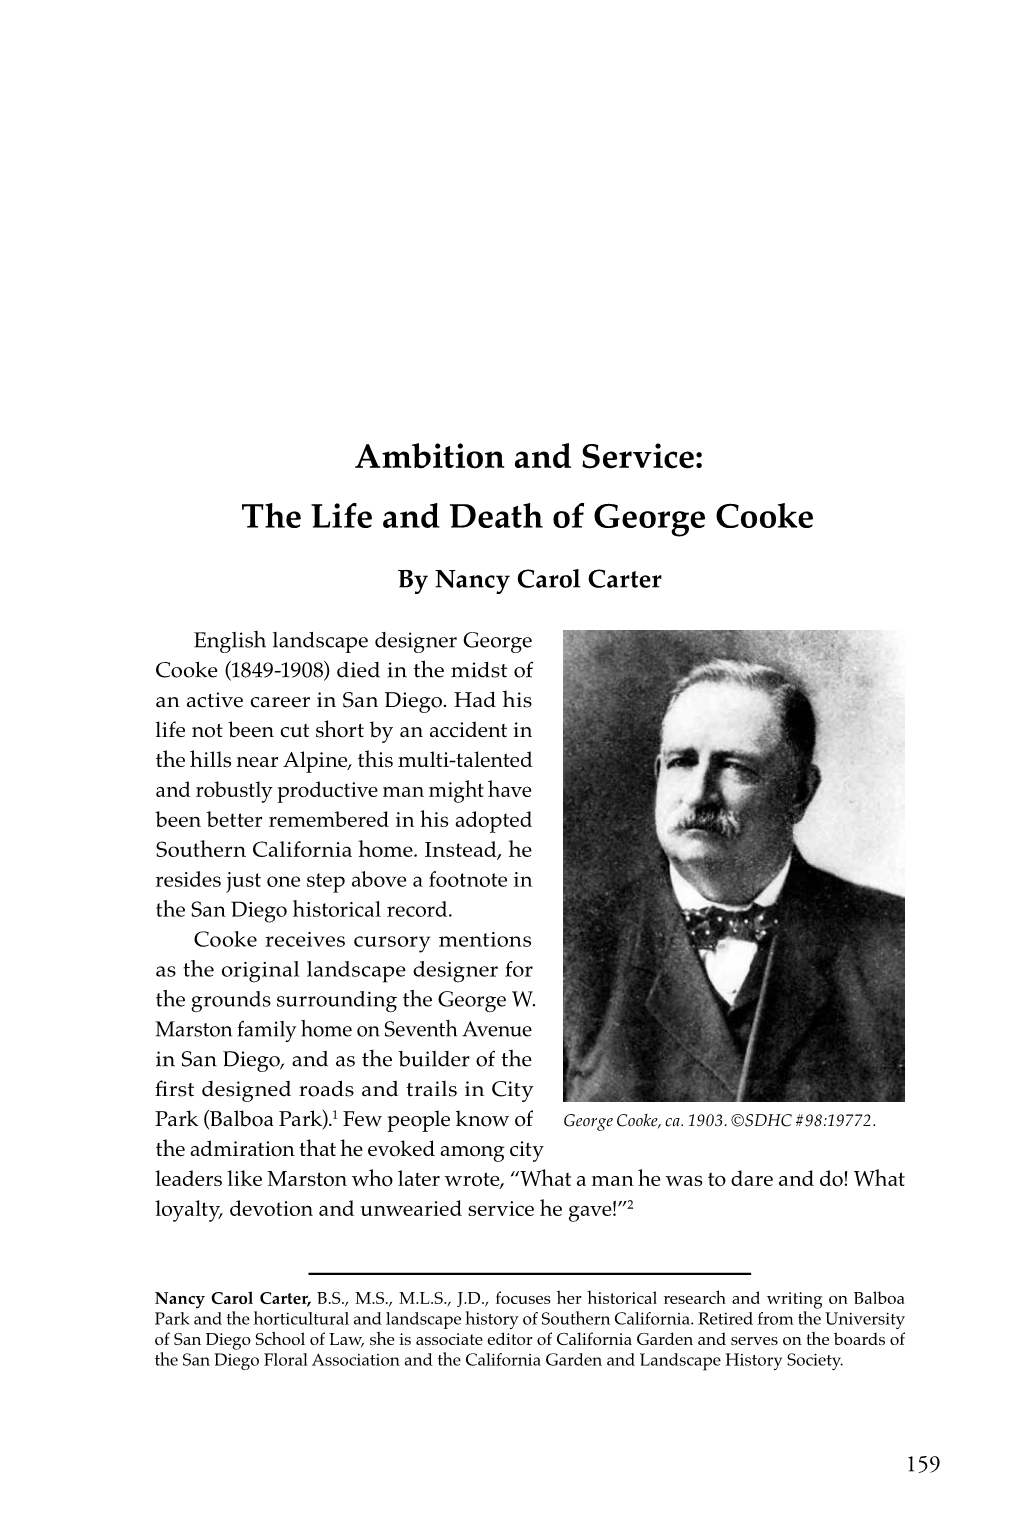 The Life and Death of George Cooke